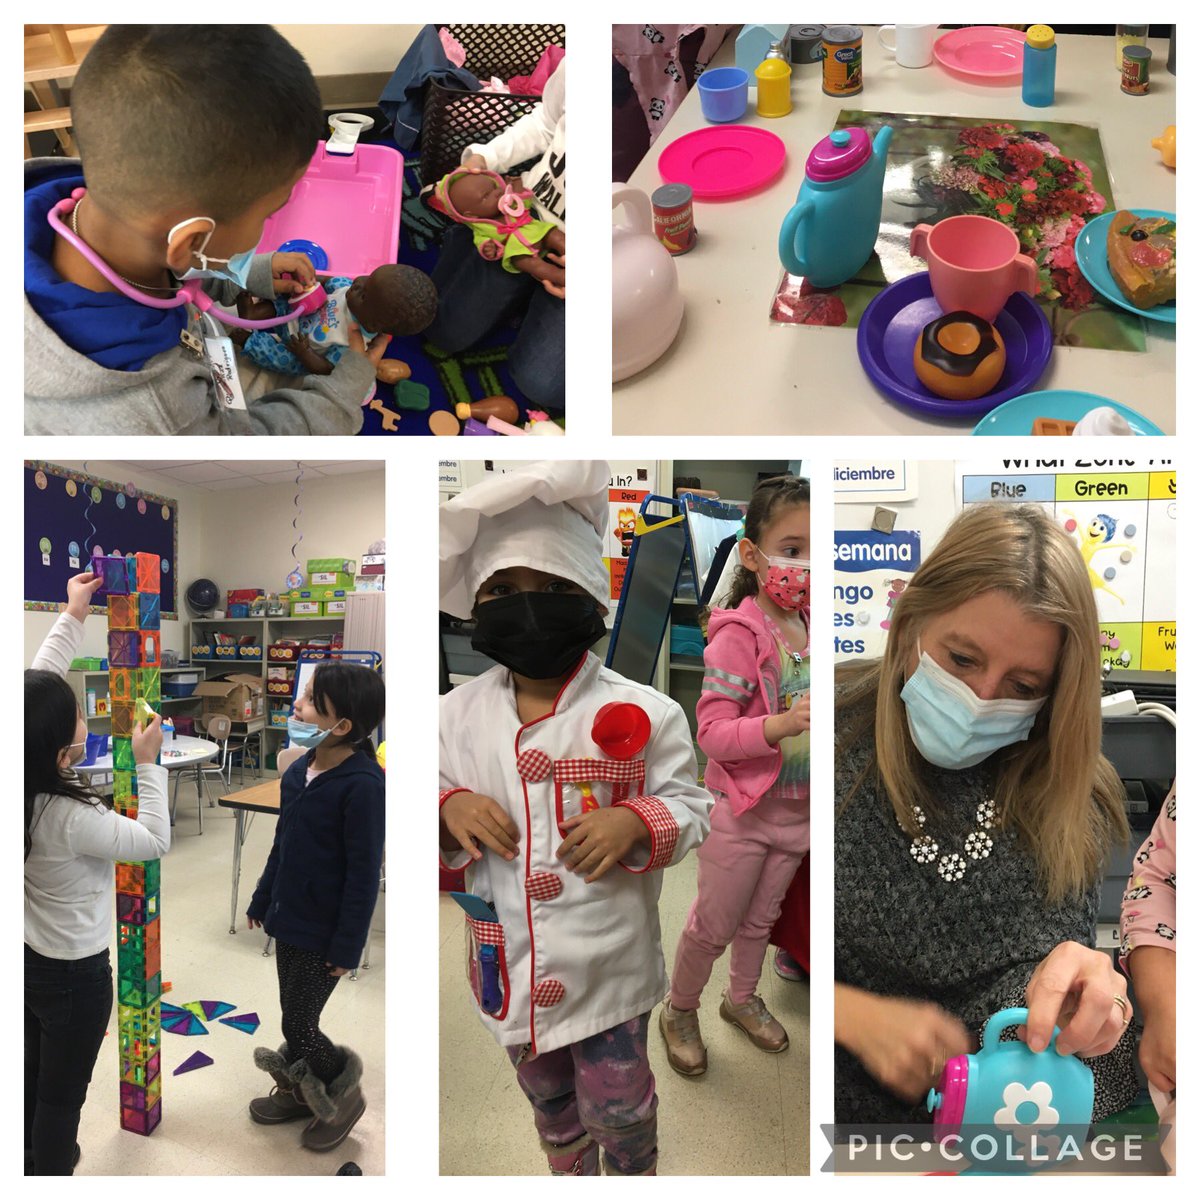 Today I had the pleasure to meet our future doctors, engineers, pastry chefs and even enjoyed a cup of tea😊 #lovewhatIdo #lovewhatYOUdo @rcsdsch33 @RCSDNYS